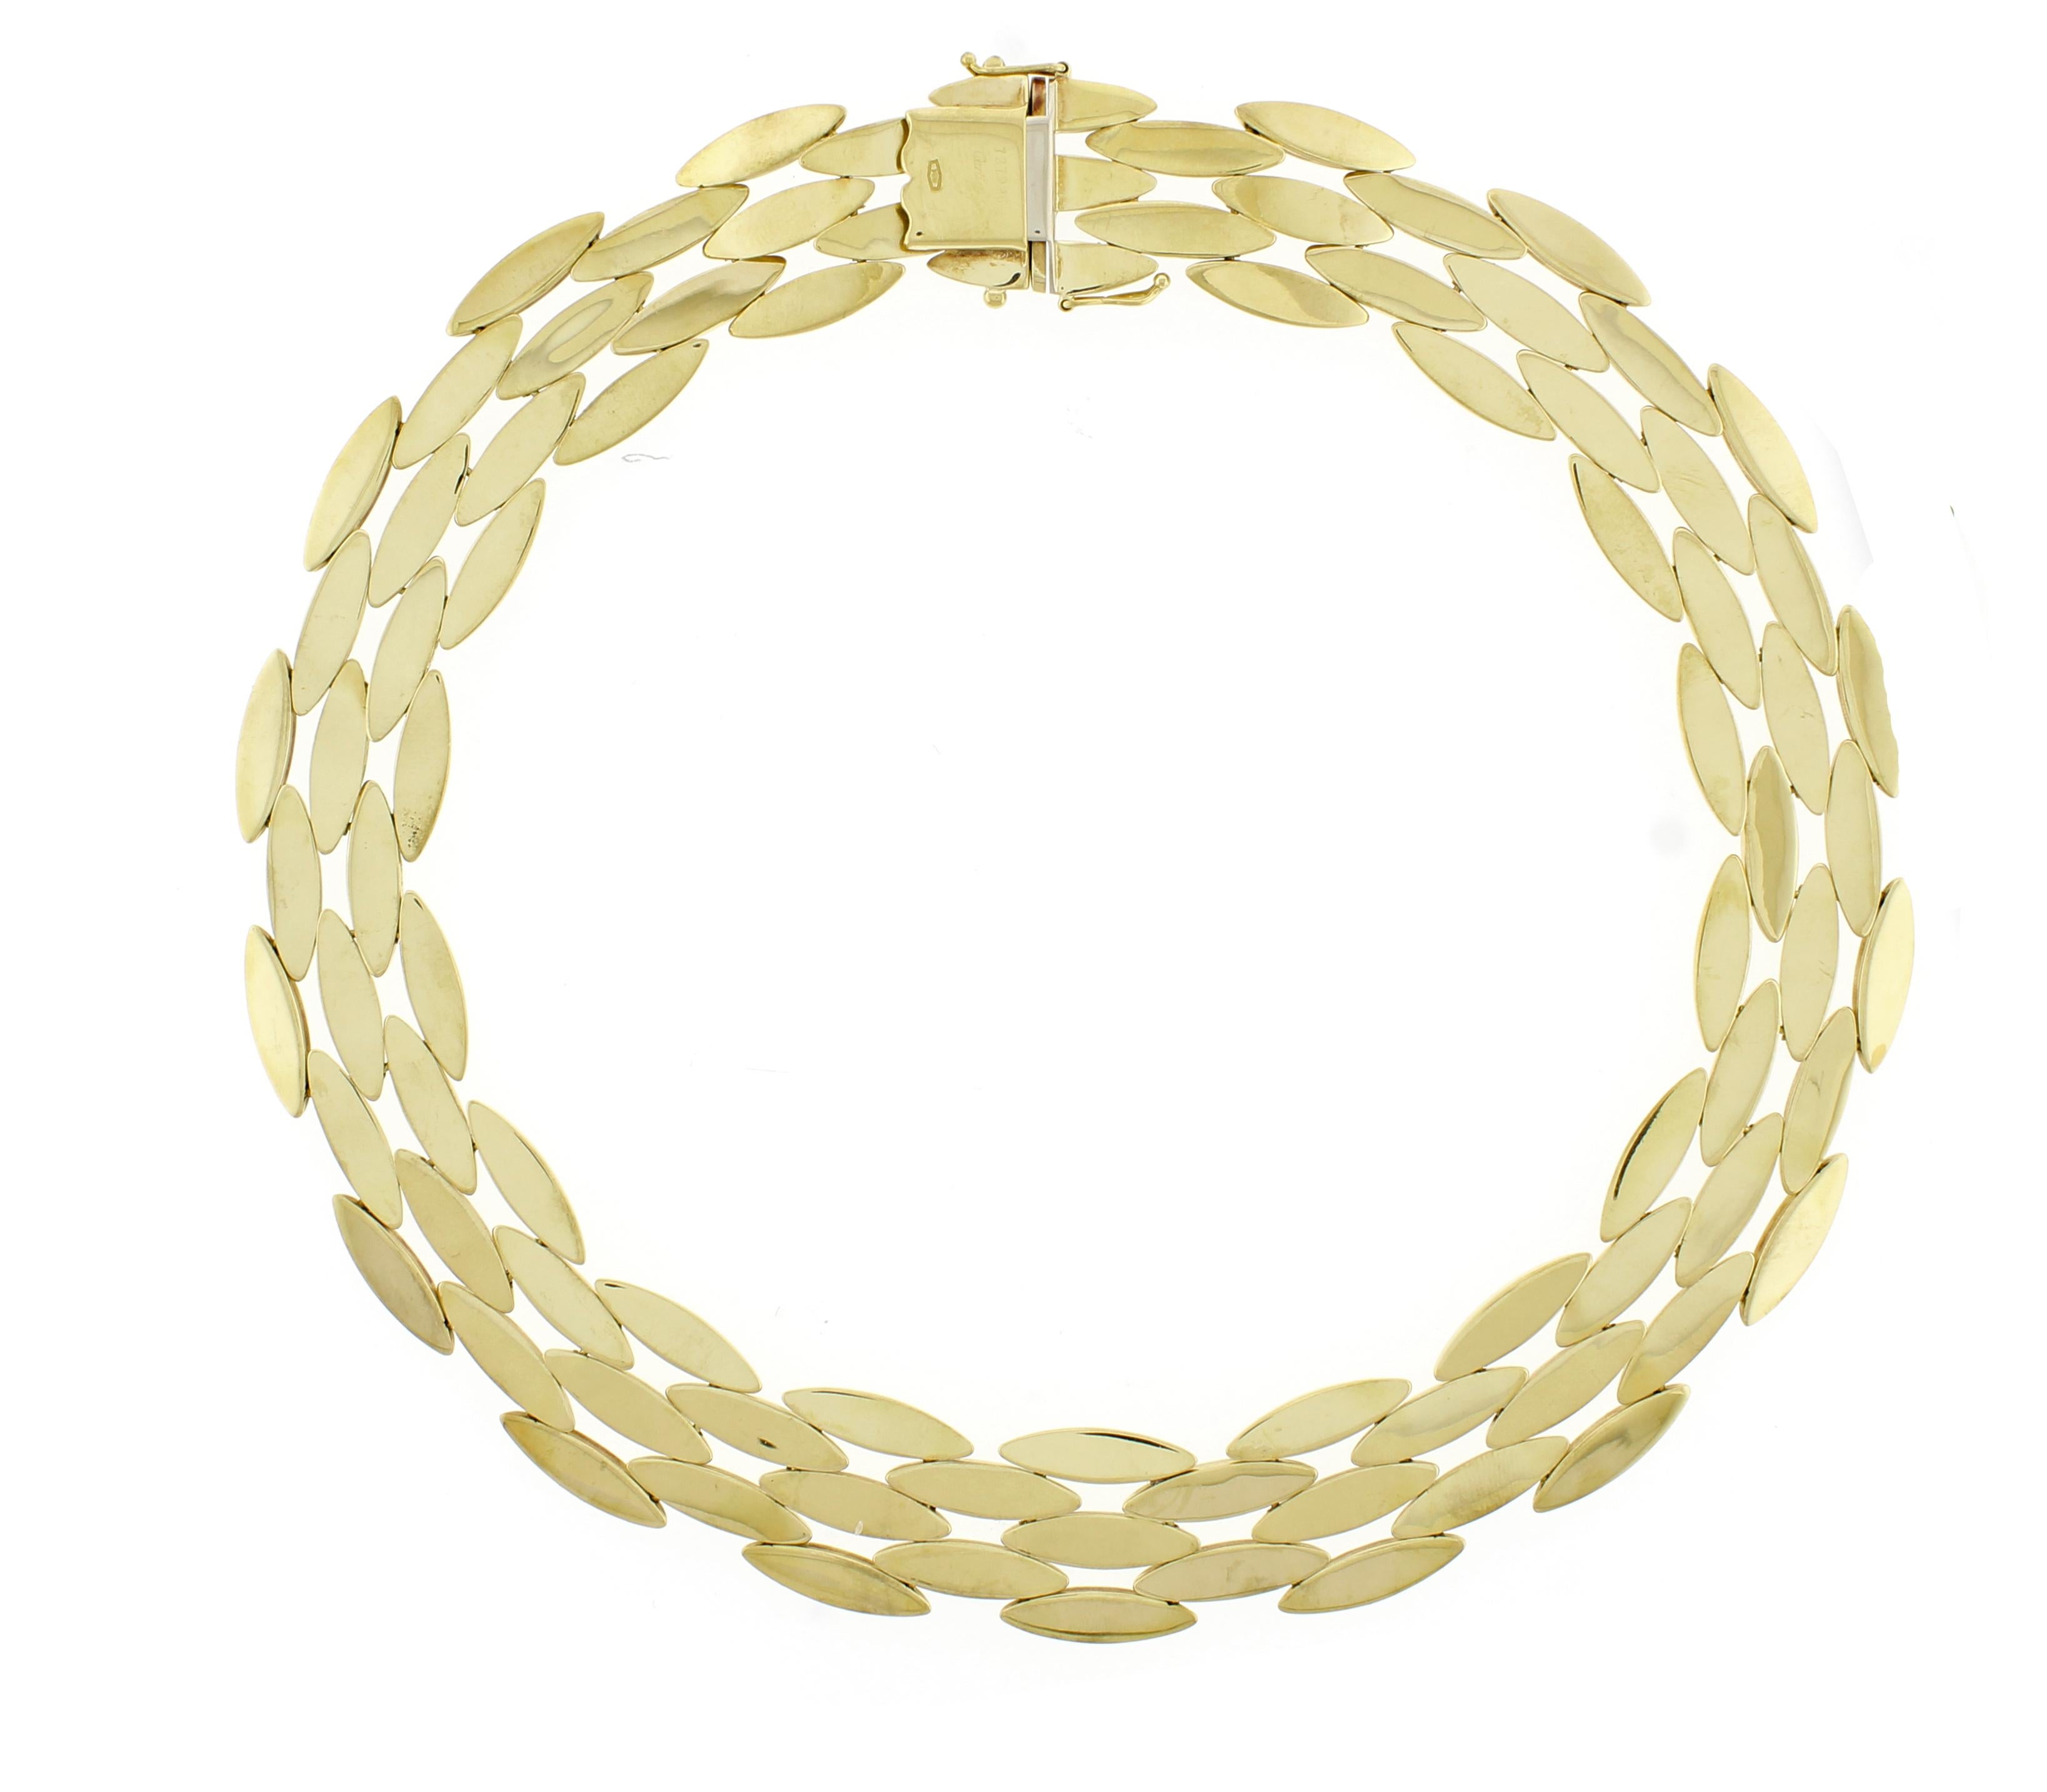 From Cartier iconic Gentiane collection their classic 5 row rice link necklace
• Signed Cartier
• Metal:  18 karat gold
• Circa: 1980s
• Size: 16inches
• 9.65mm wide, a little over an inch	
• Cartier Box
• Condition: Very good
